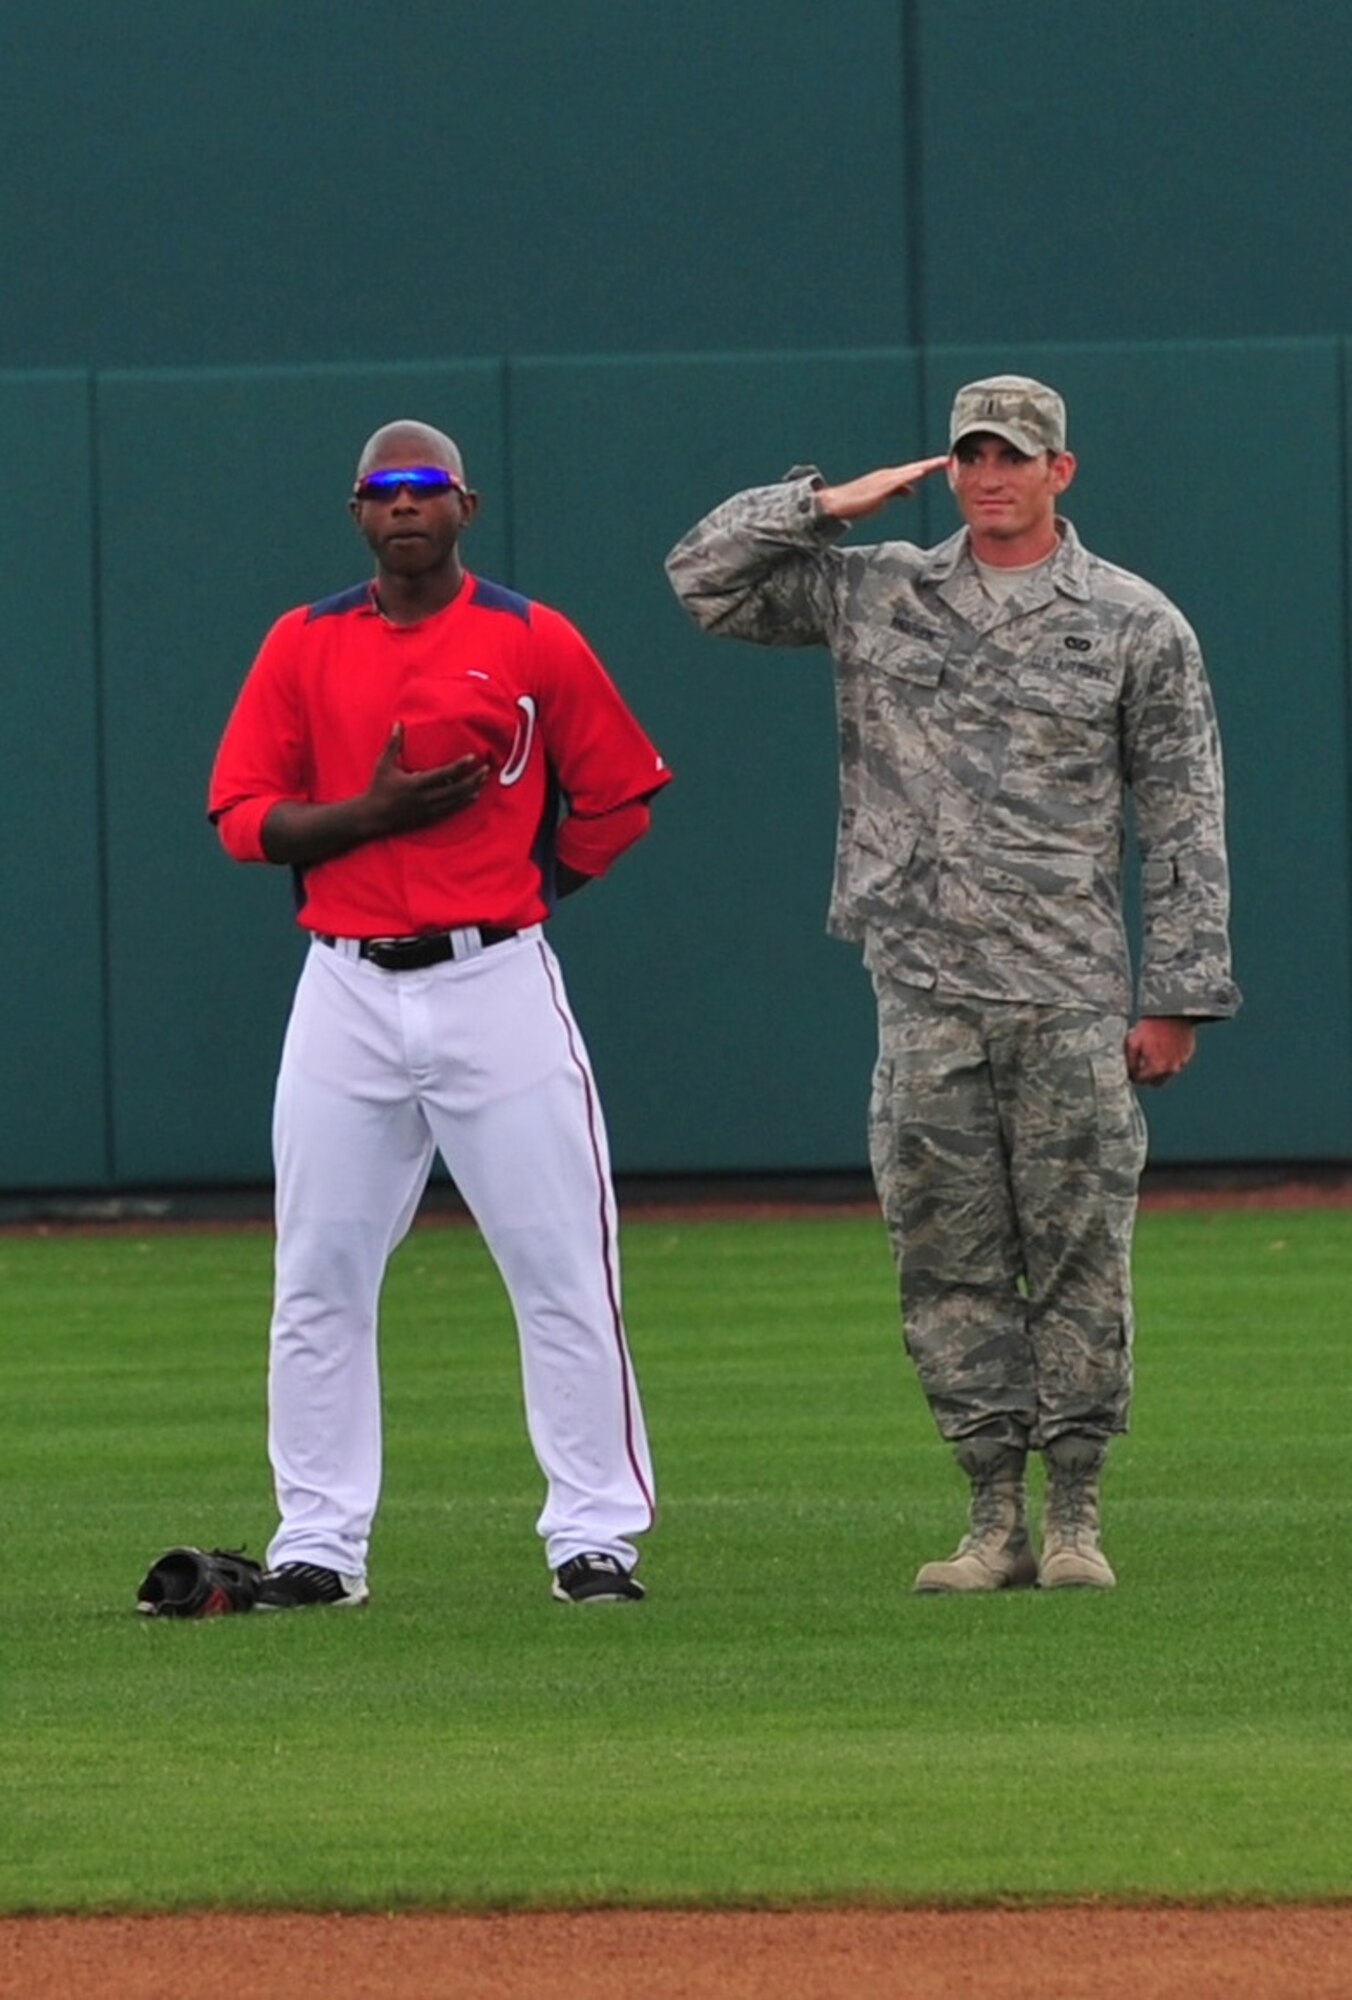 The Washington Nationals, along with their sponsor, Science Applications
International Corporation, are hosting a "Military Appreciation Day" during
the March 5 game against the Houston Astros at Space Coast Stadium in Viera.